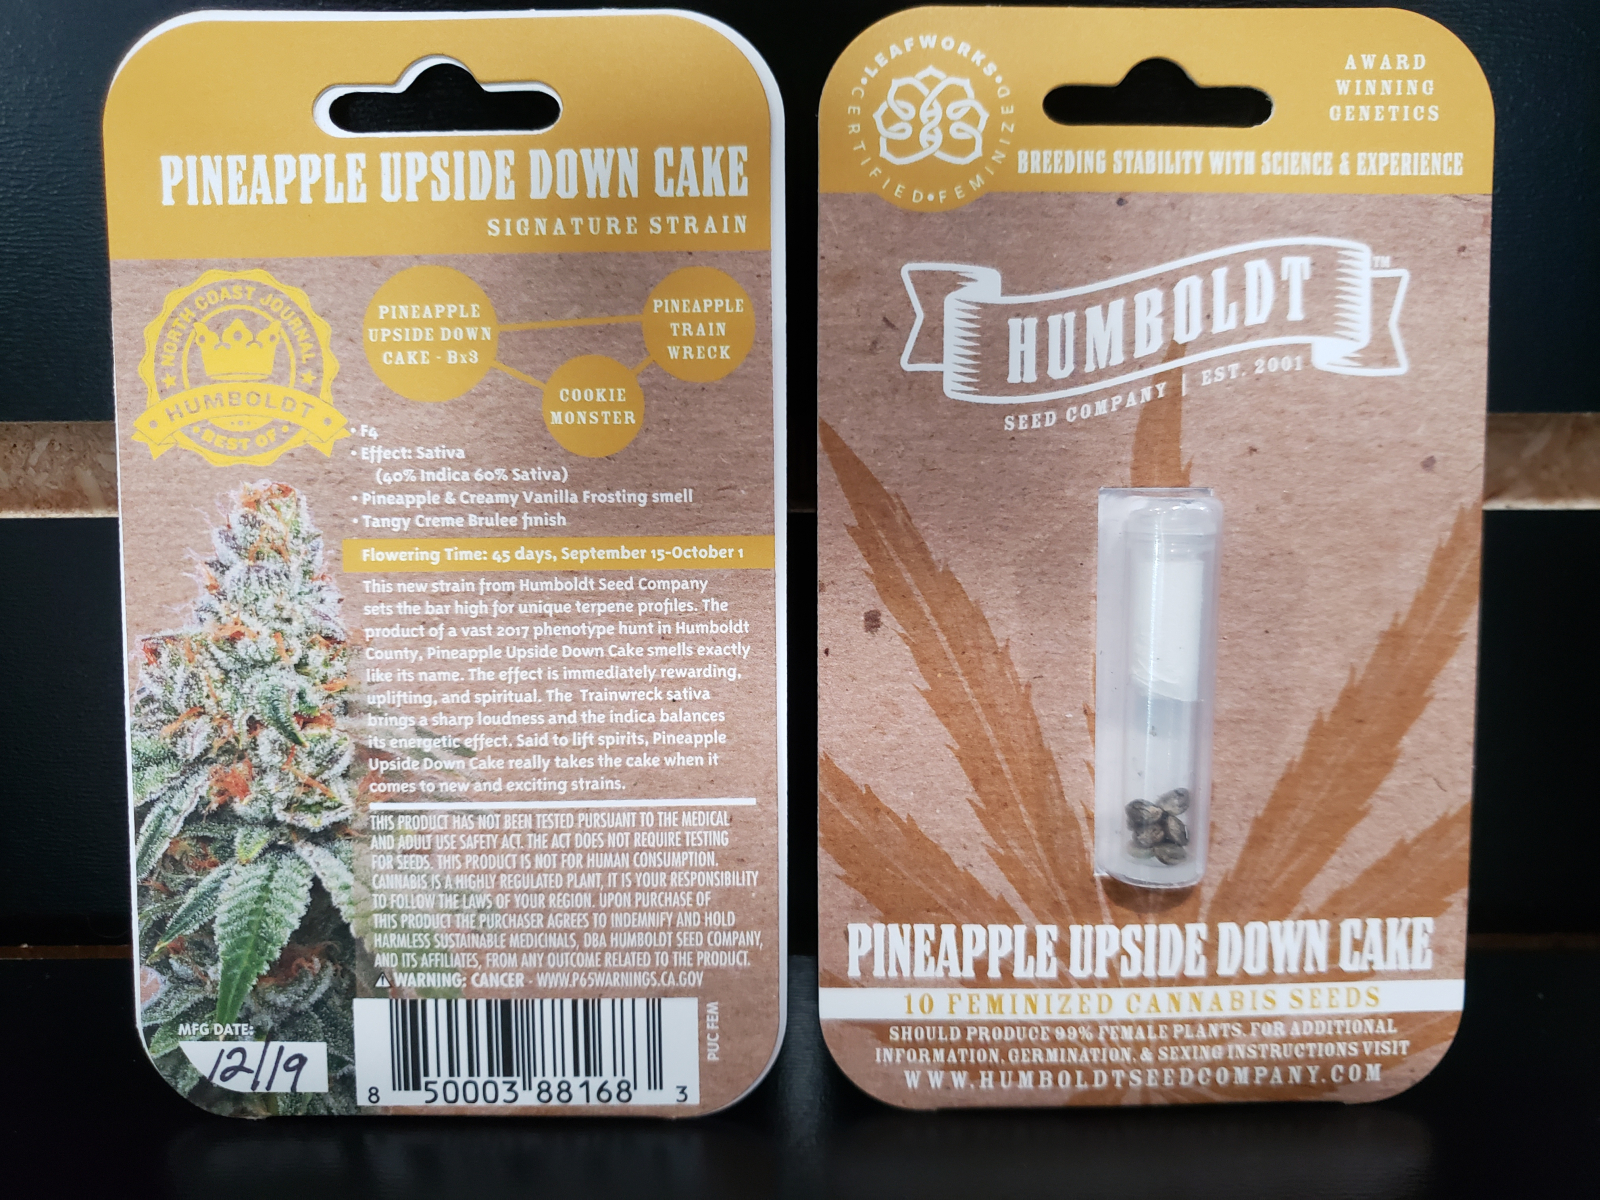 Humboldt Seed Co Pineapple Upside down cake feminized 10 count